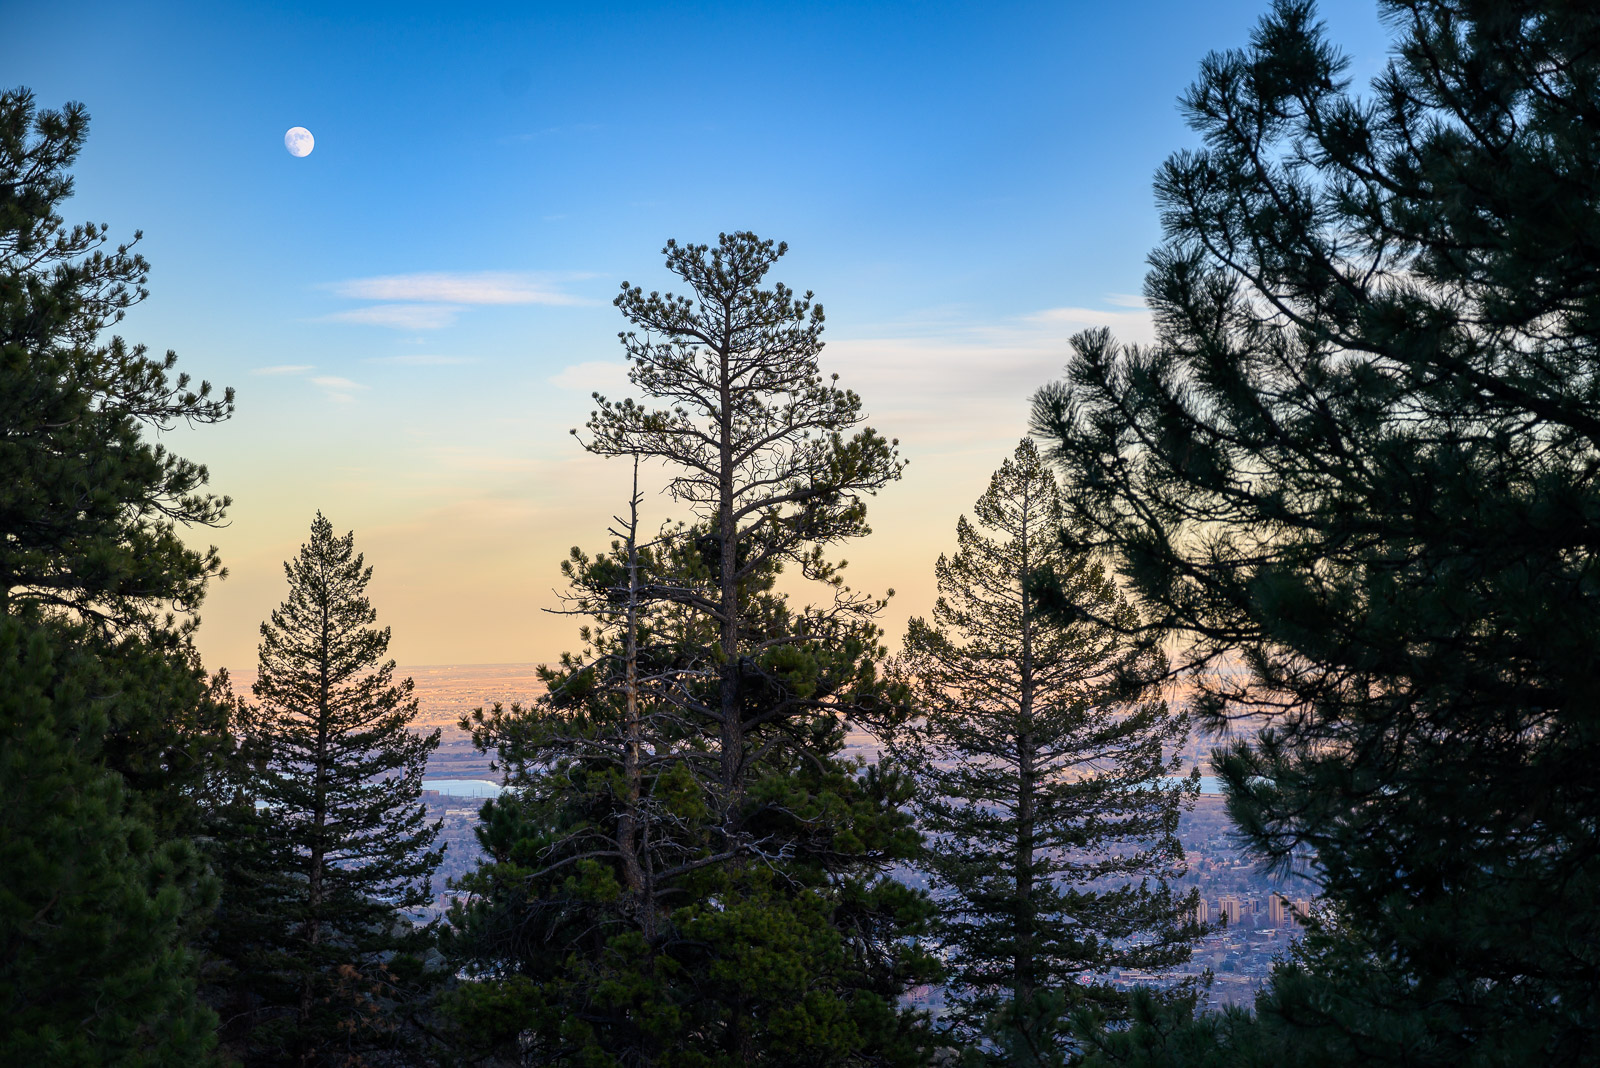 The city of Boulder glimpsed from behind the silhouettes of tall pine trees as the moon rises and the sun sets.